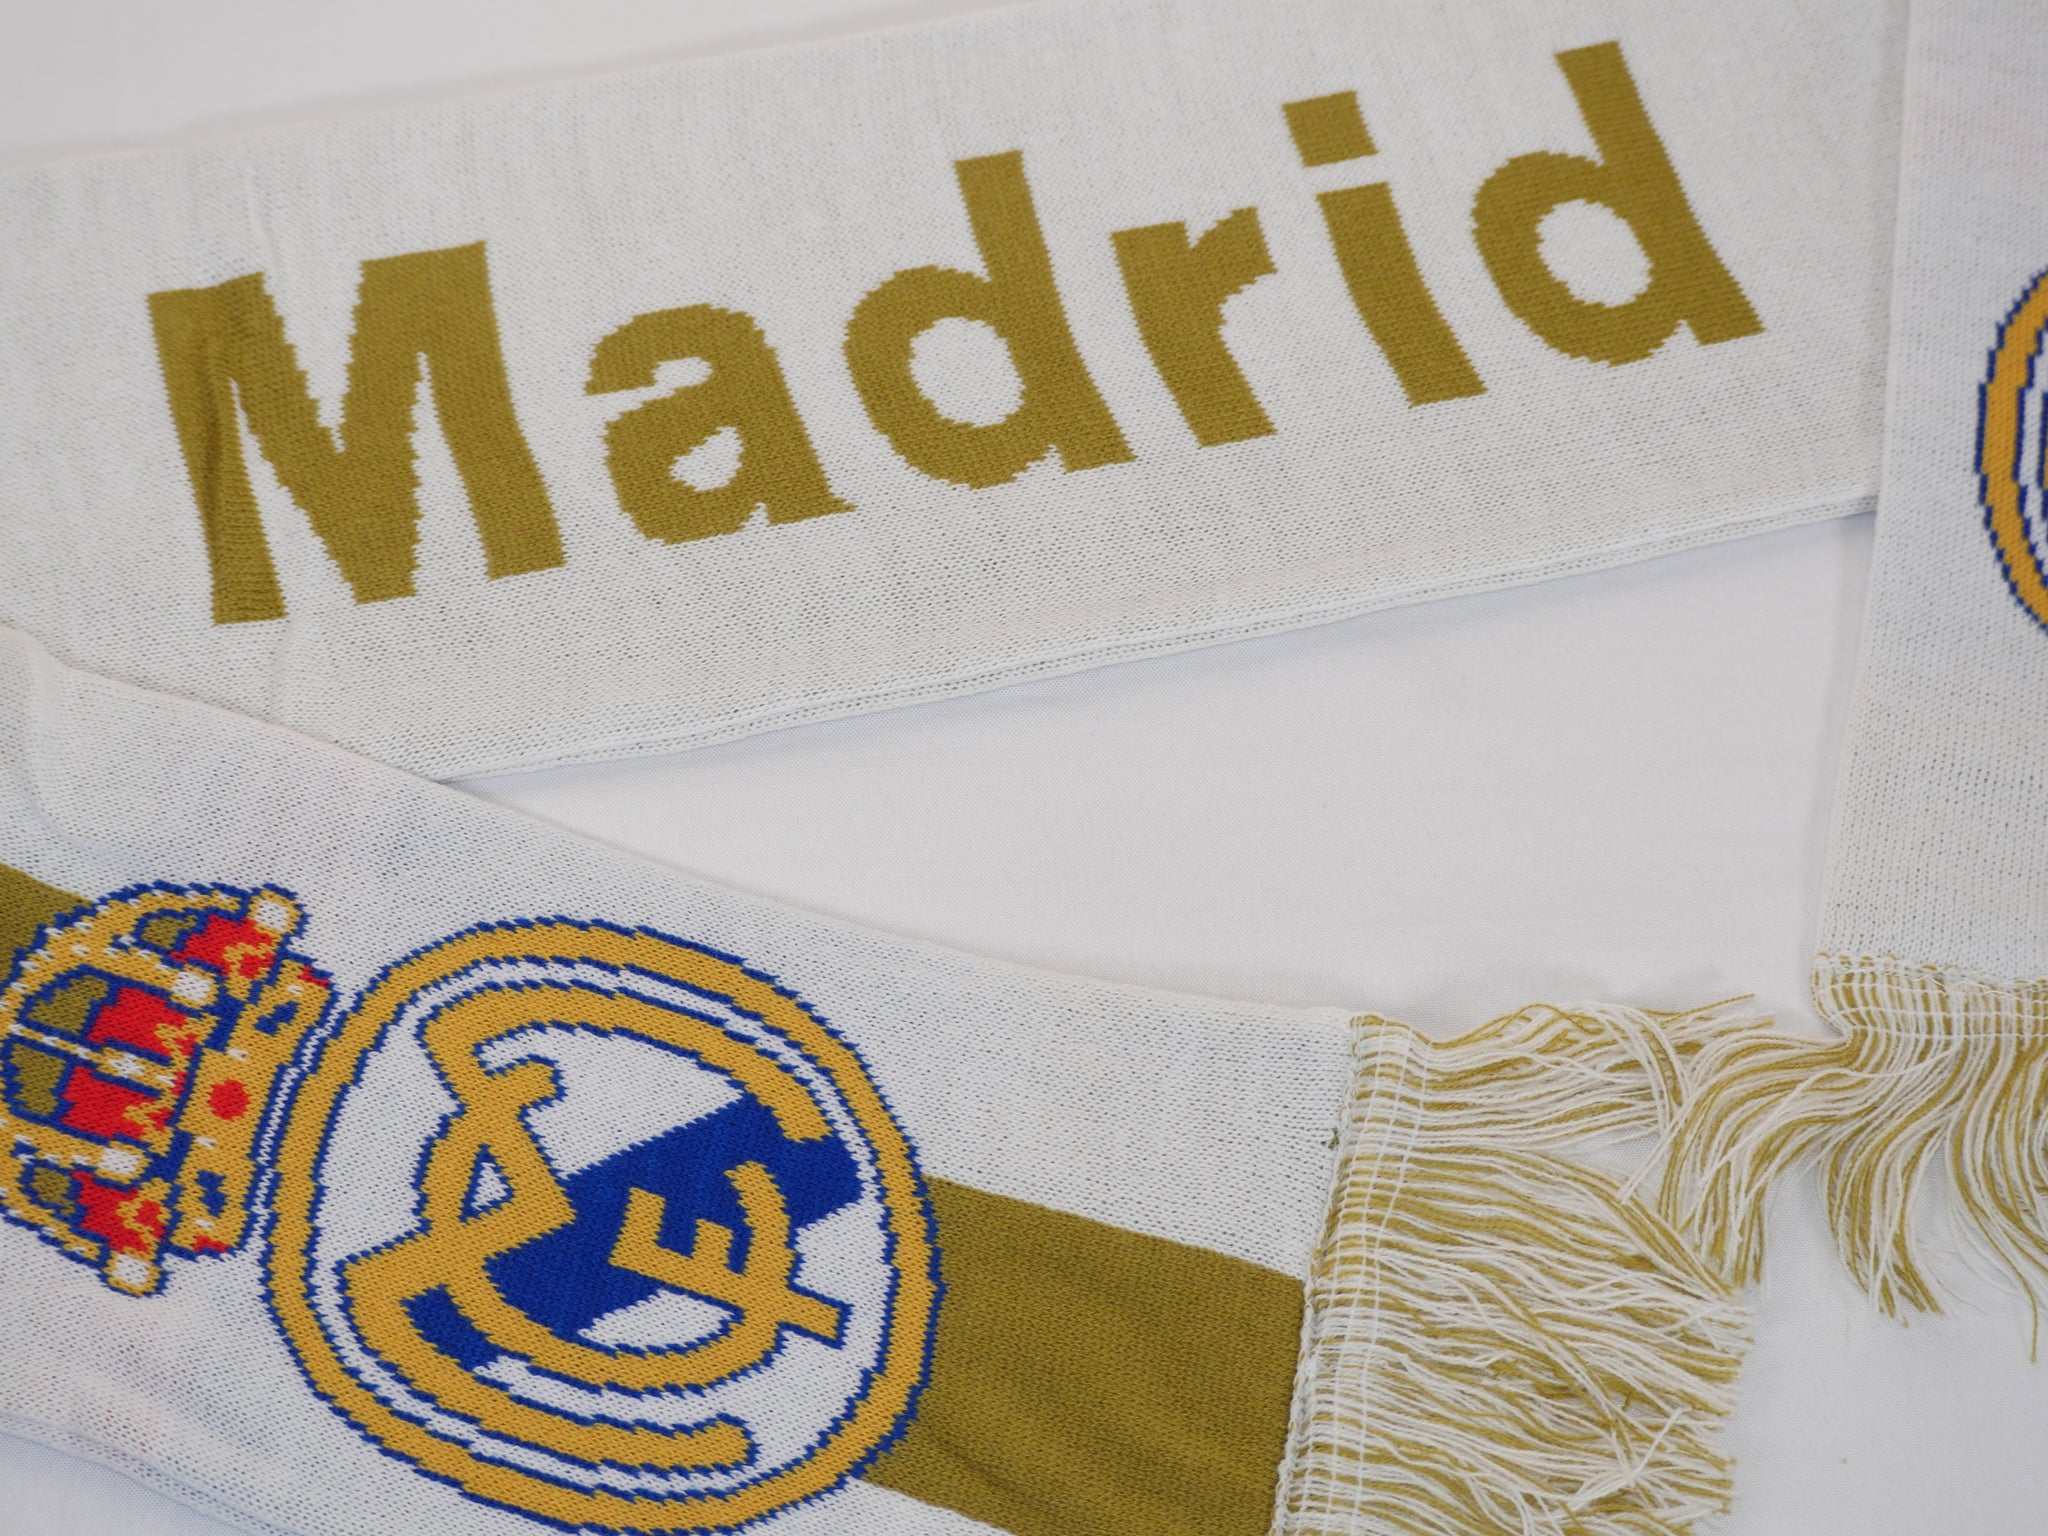 Real Madrid Reversible Supporter Scarf - 60"